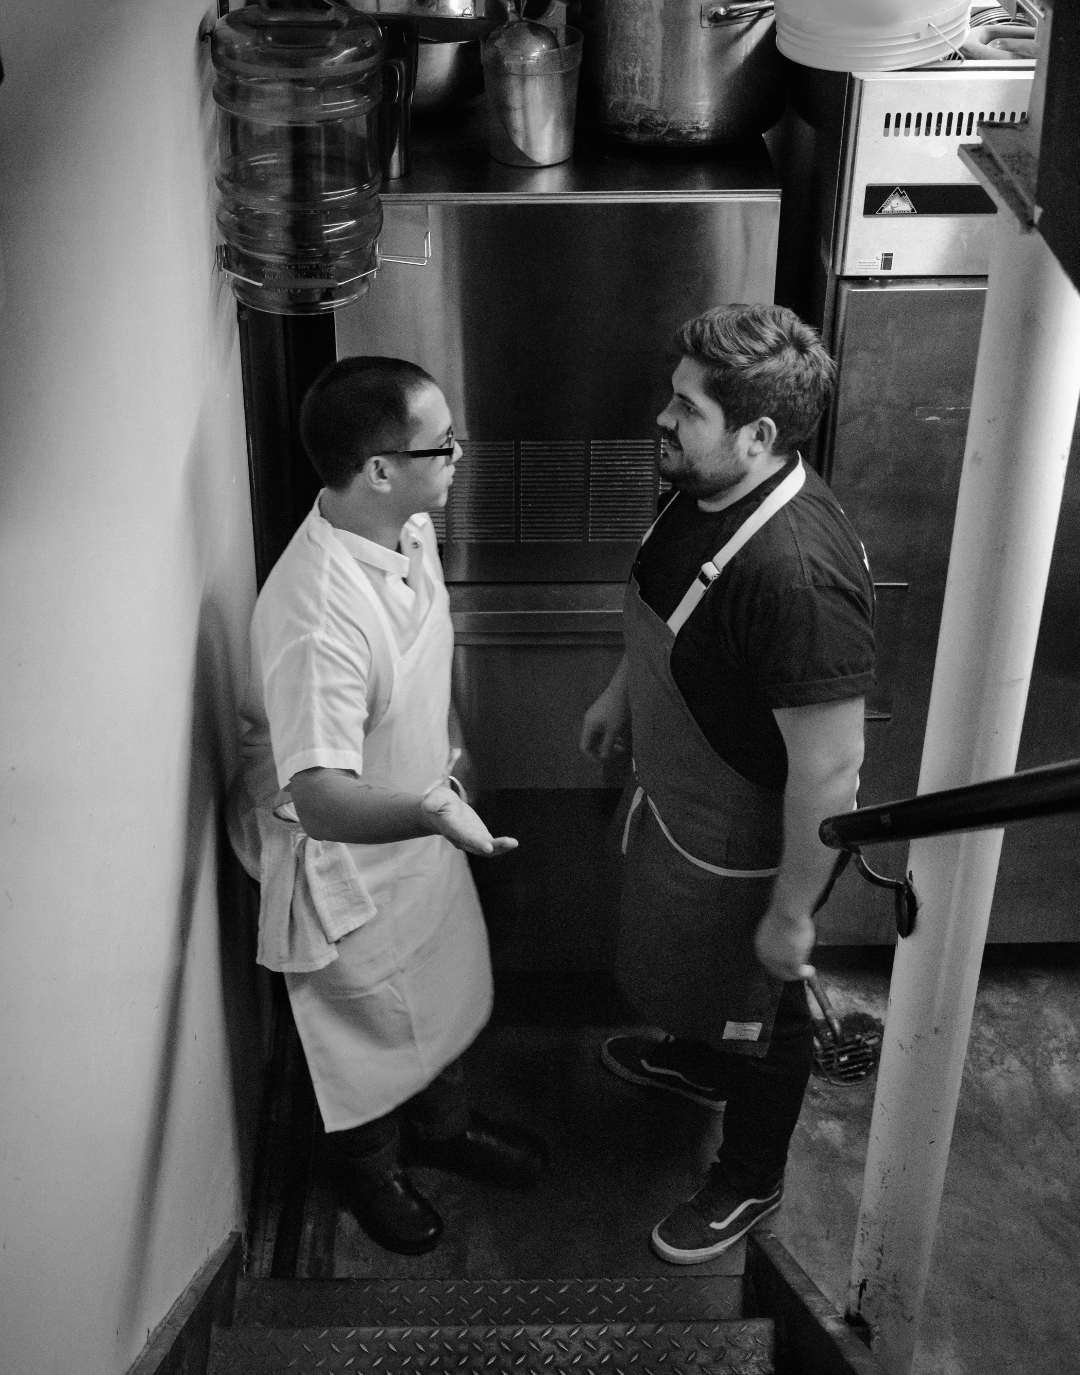 Jeremiah Stone and Fabián von Hauske, wine lovers and authors of A Very Serious Cookbook
